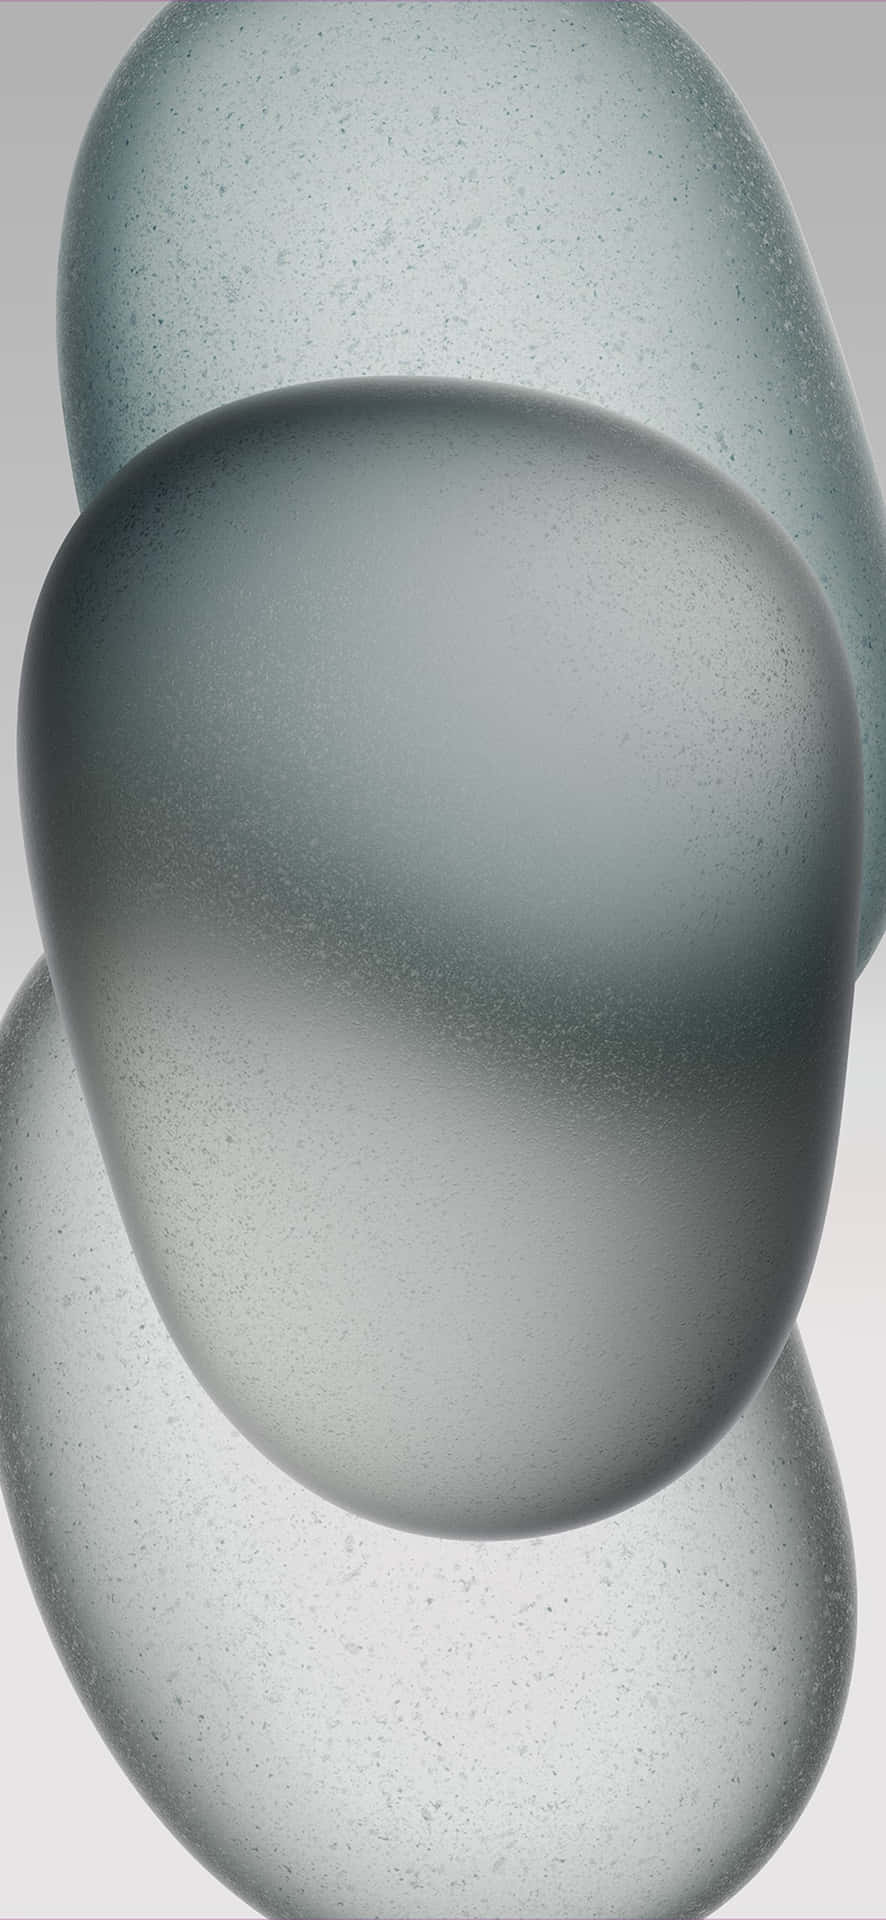 Abstract Frosted Glass Sculpture Wallpaper